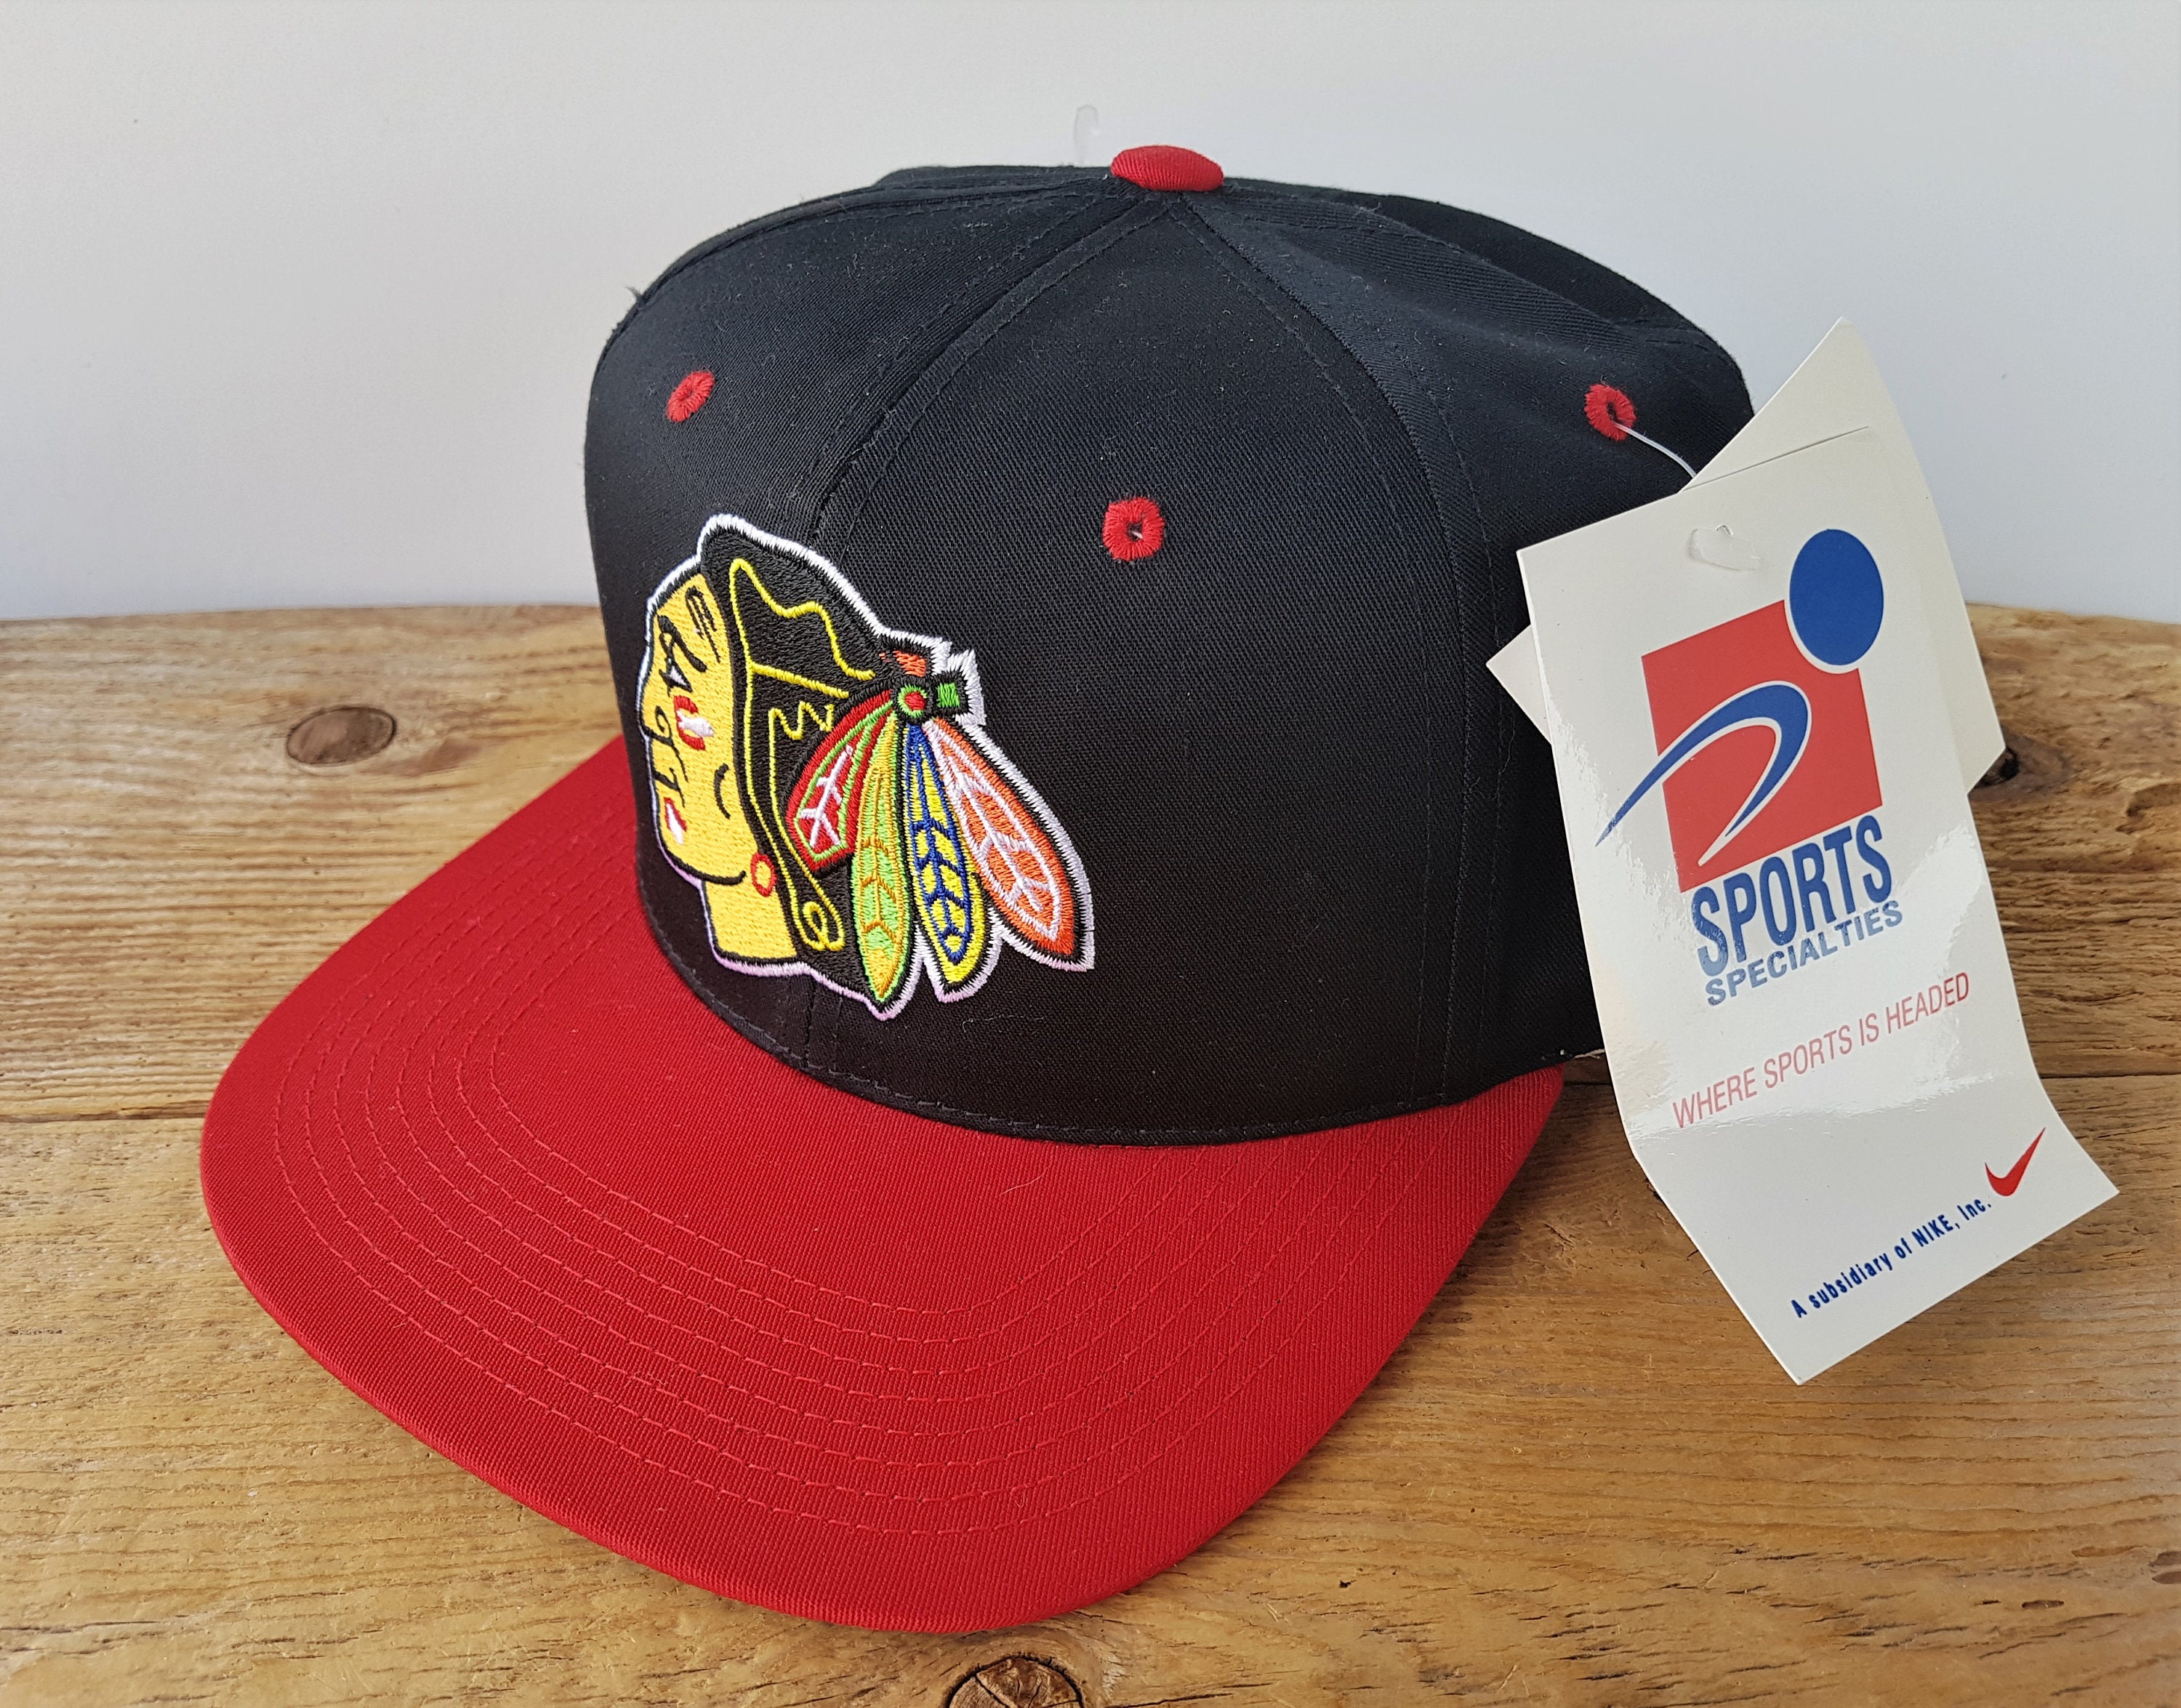 Mitchell & Ness Chicago Blackhawks Vintage Fitted Hat